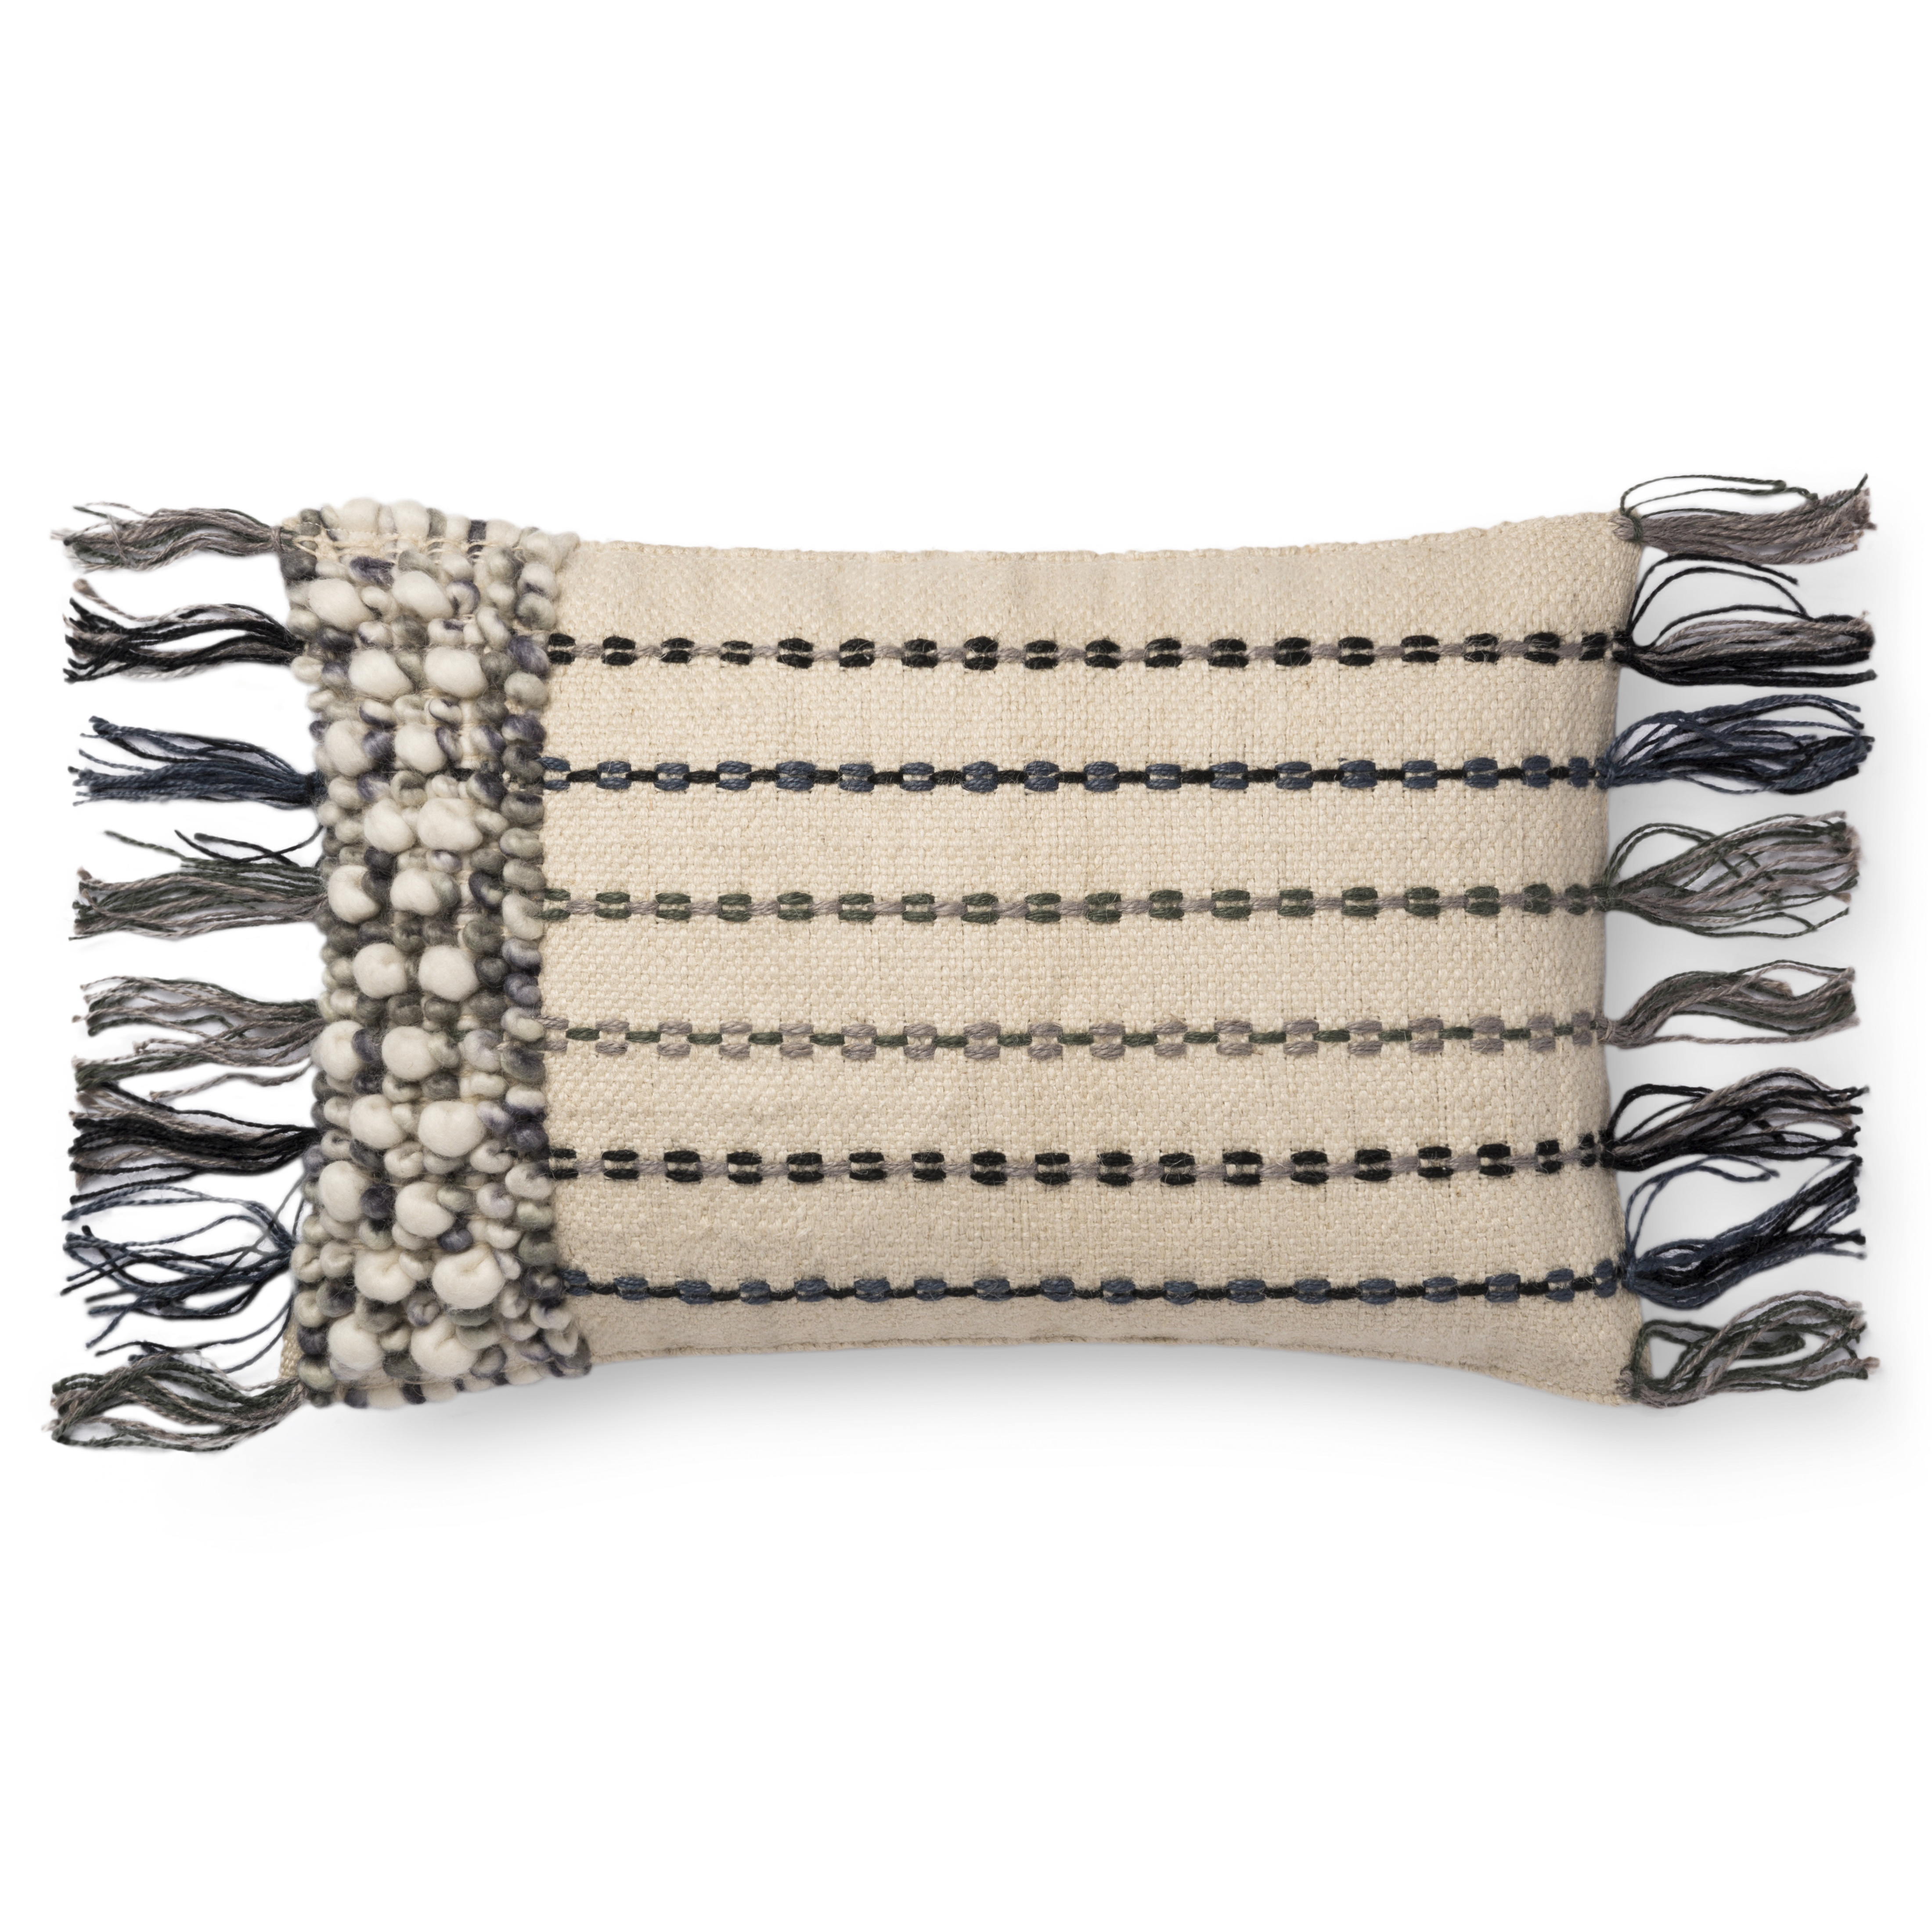 Woven Lumbar Pillow Cover with Tassels, 13" x 21", Natural & Blue - Image 0